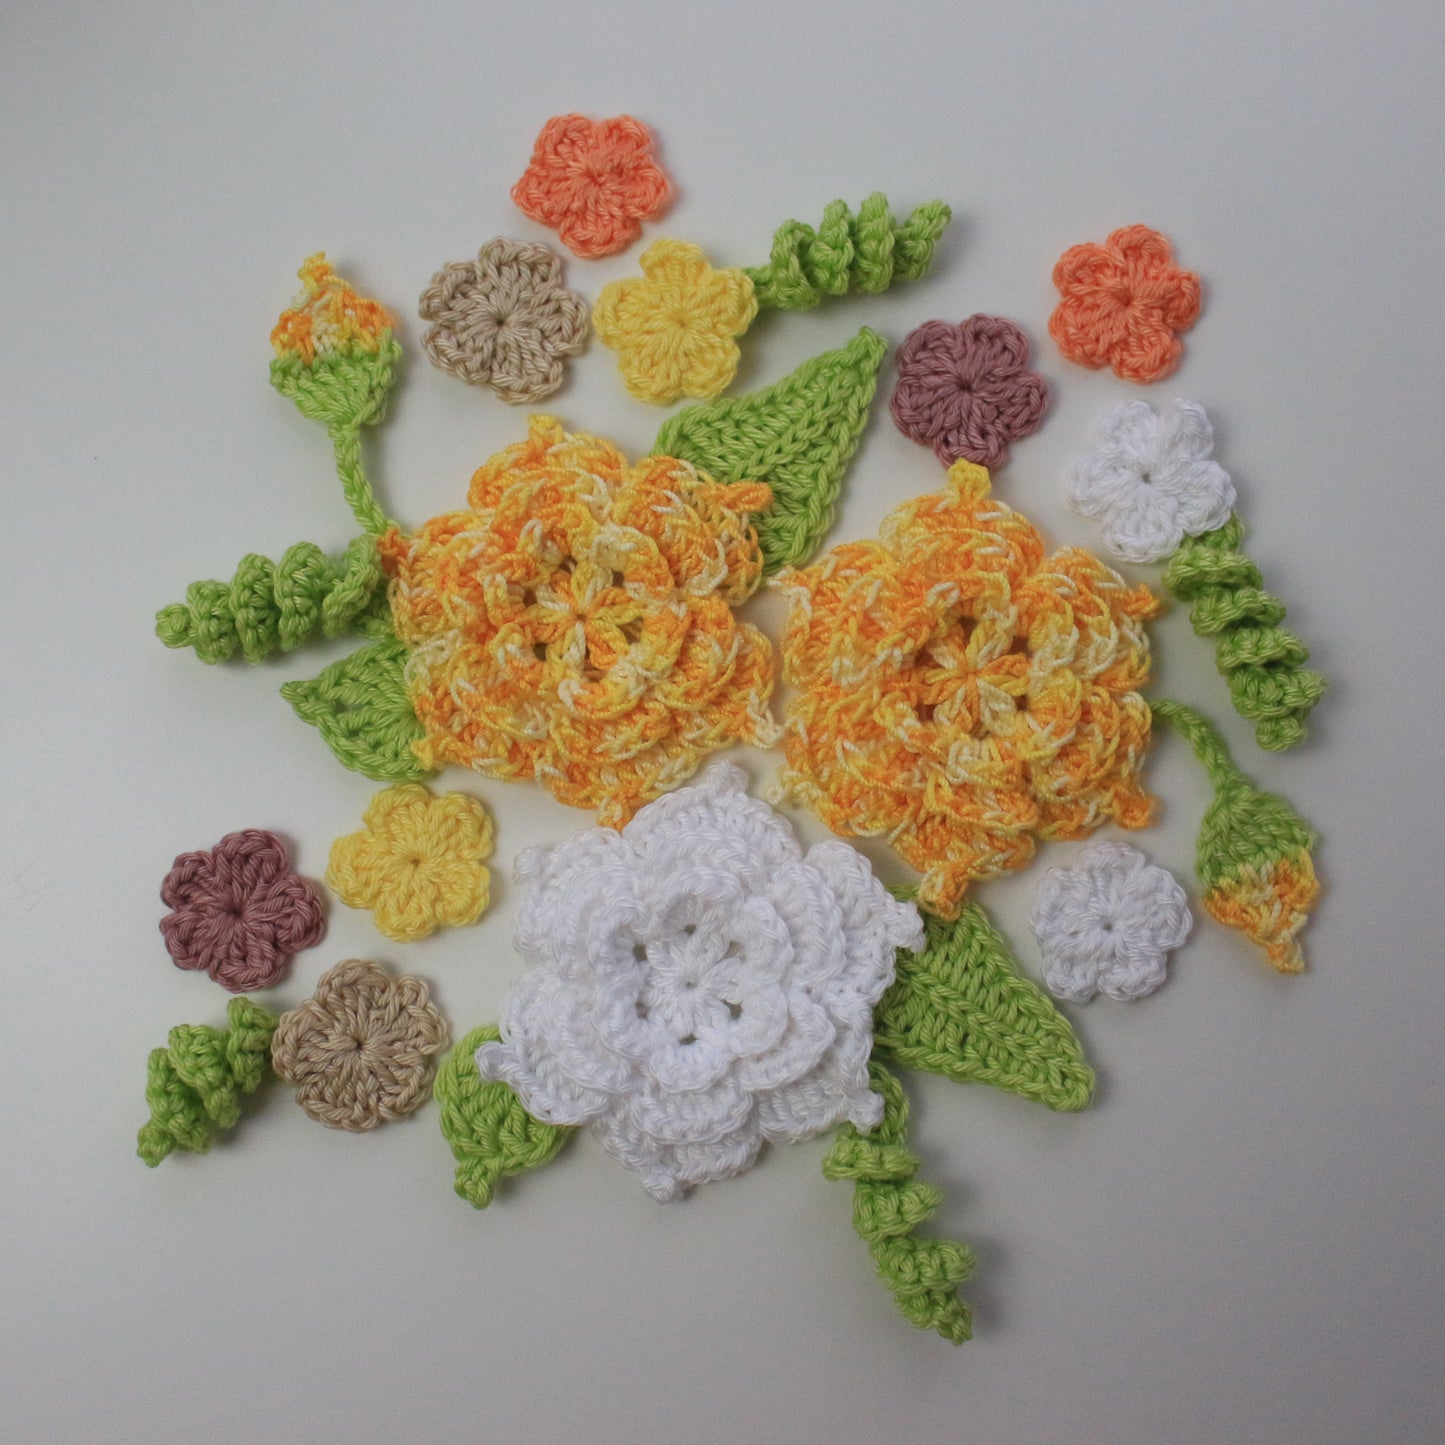 Flowers and Leaves Crochet Pattern - 3 flowers & 3 leaves, crochet flowers and leaves pattern, crochet flowers, crochet leaves